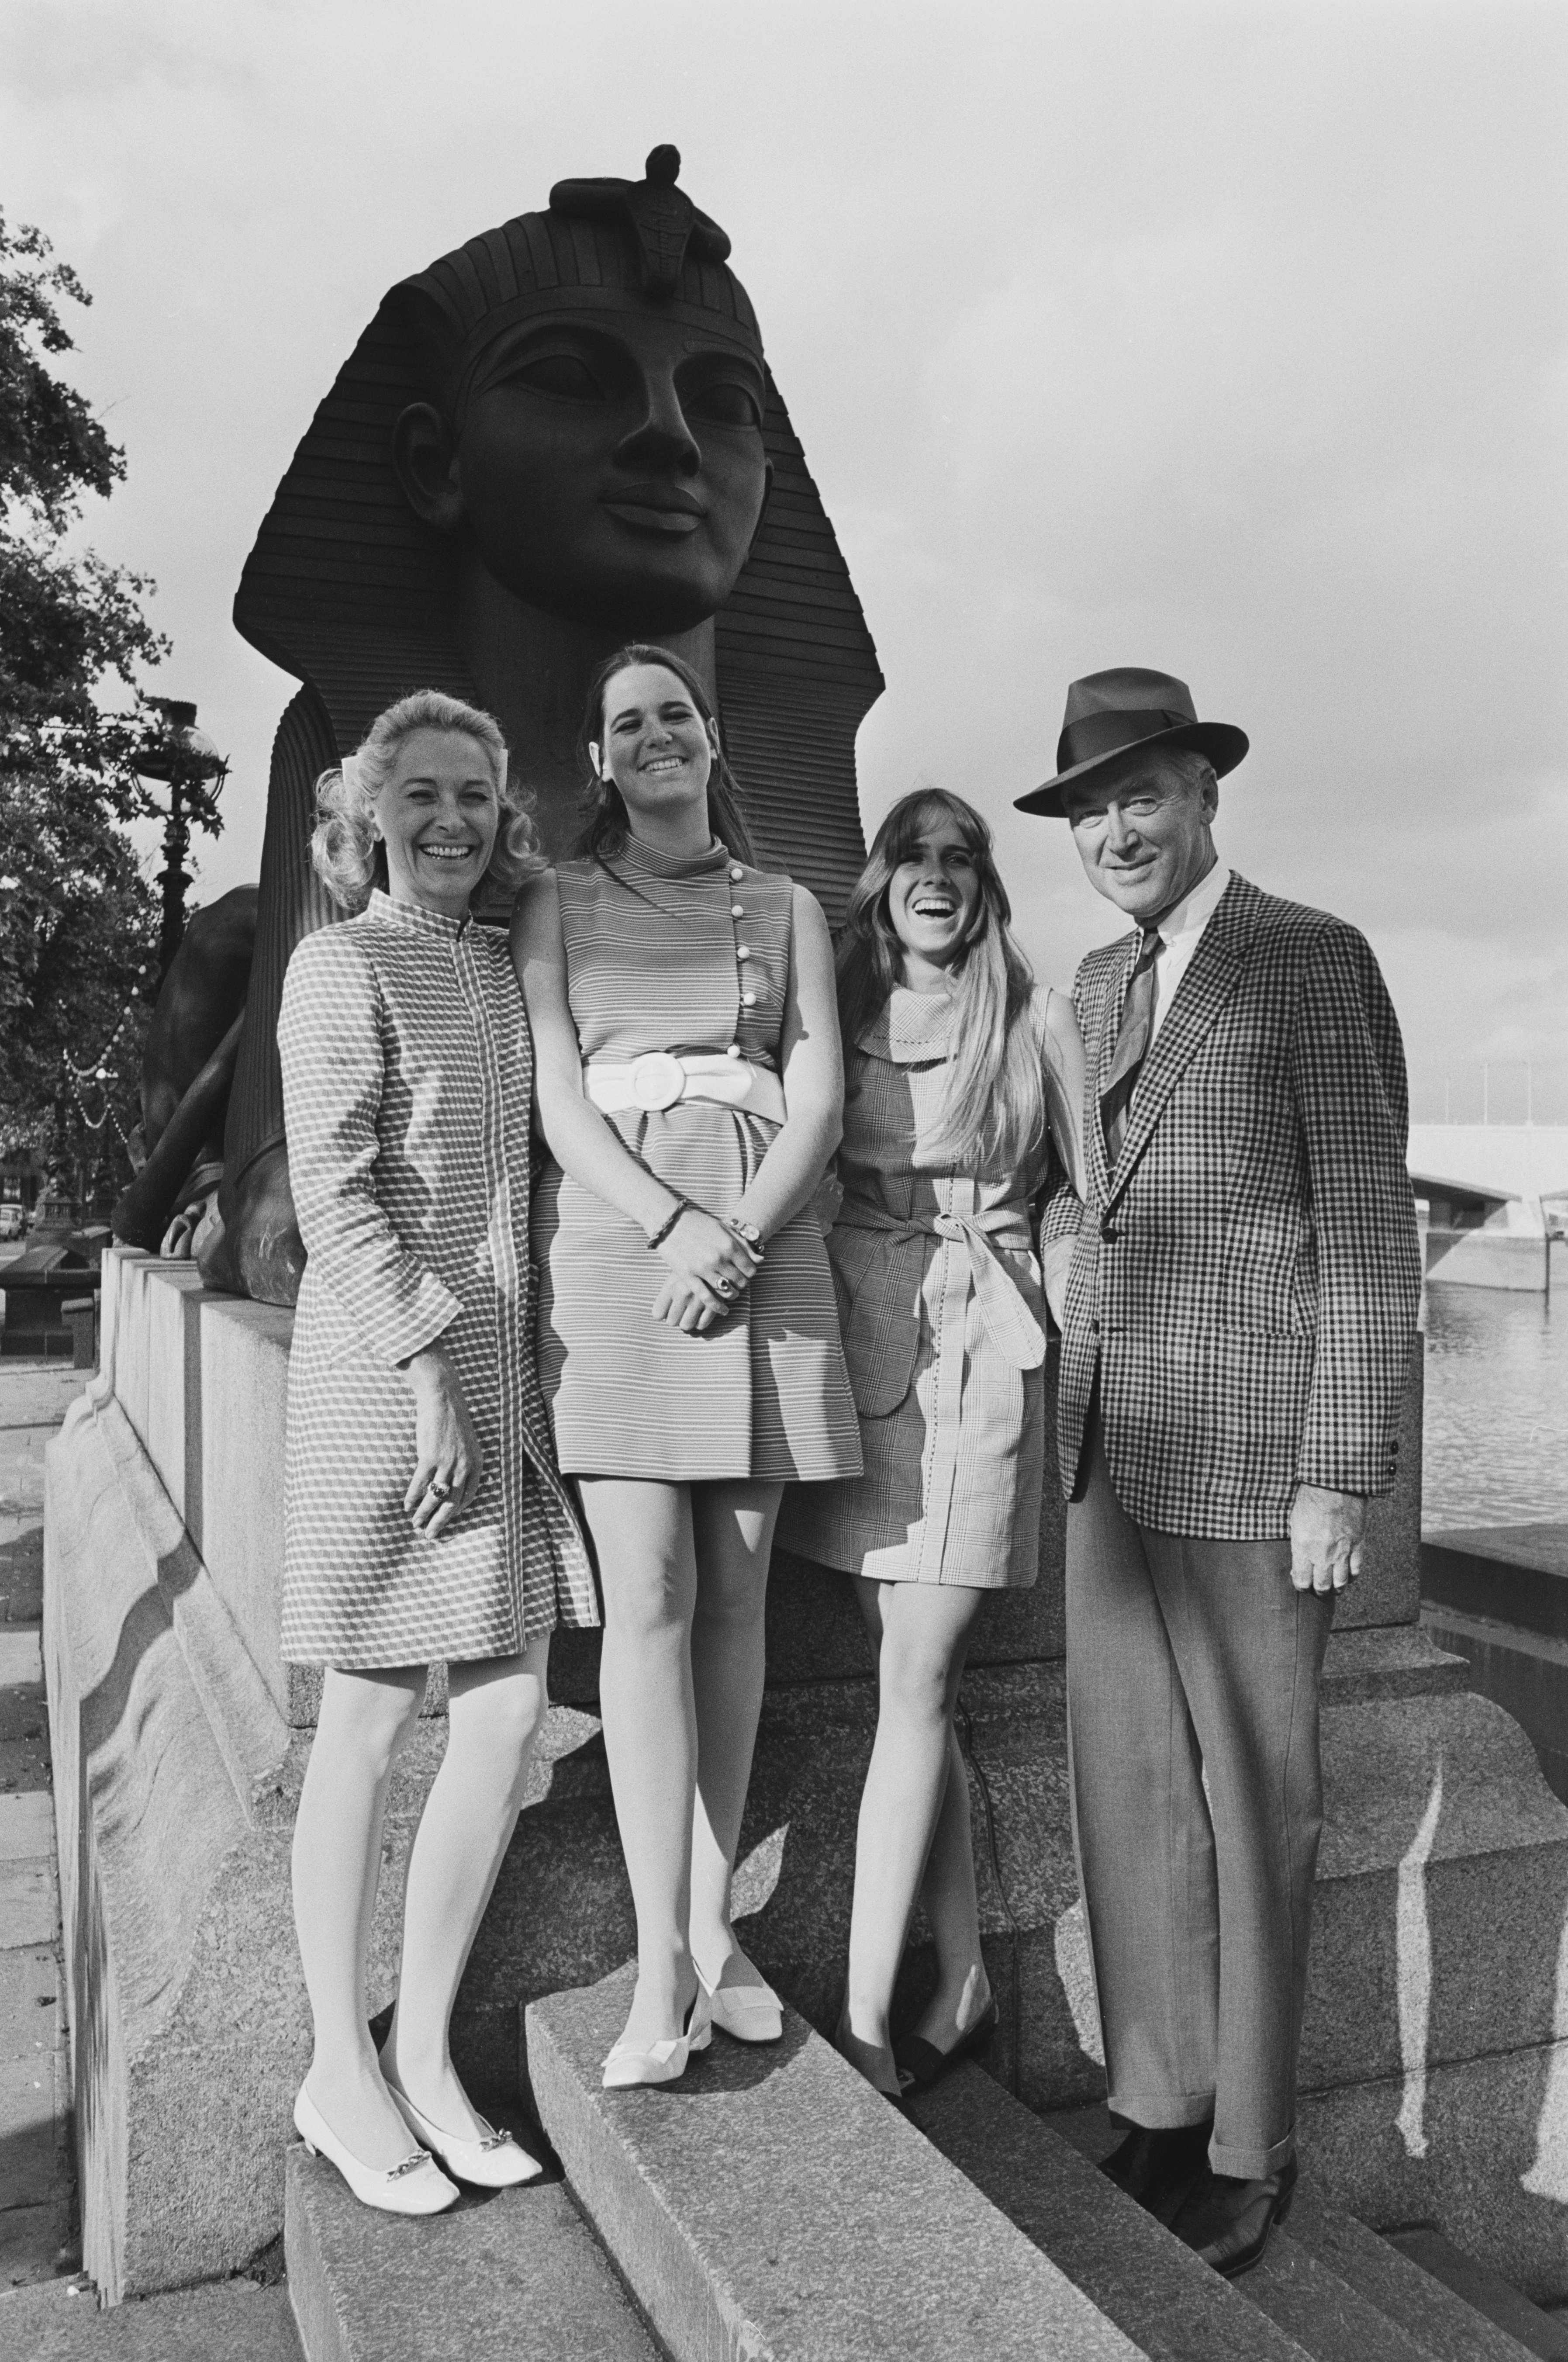 James Stewart, Gloria Hatrick McLean, and their daughters Judy and Kelly, sightseeing in London, on June 24, 1968. | Source: Downing/Daily Express/Hulton Archive/Getty Images